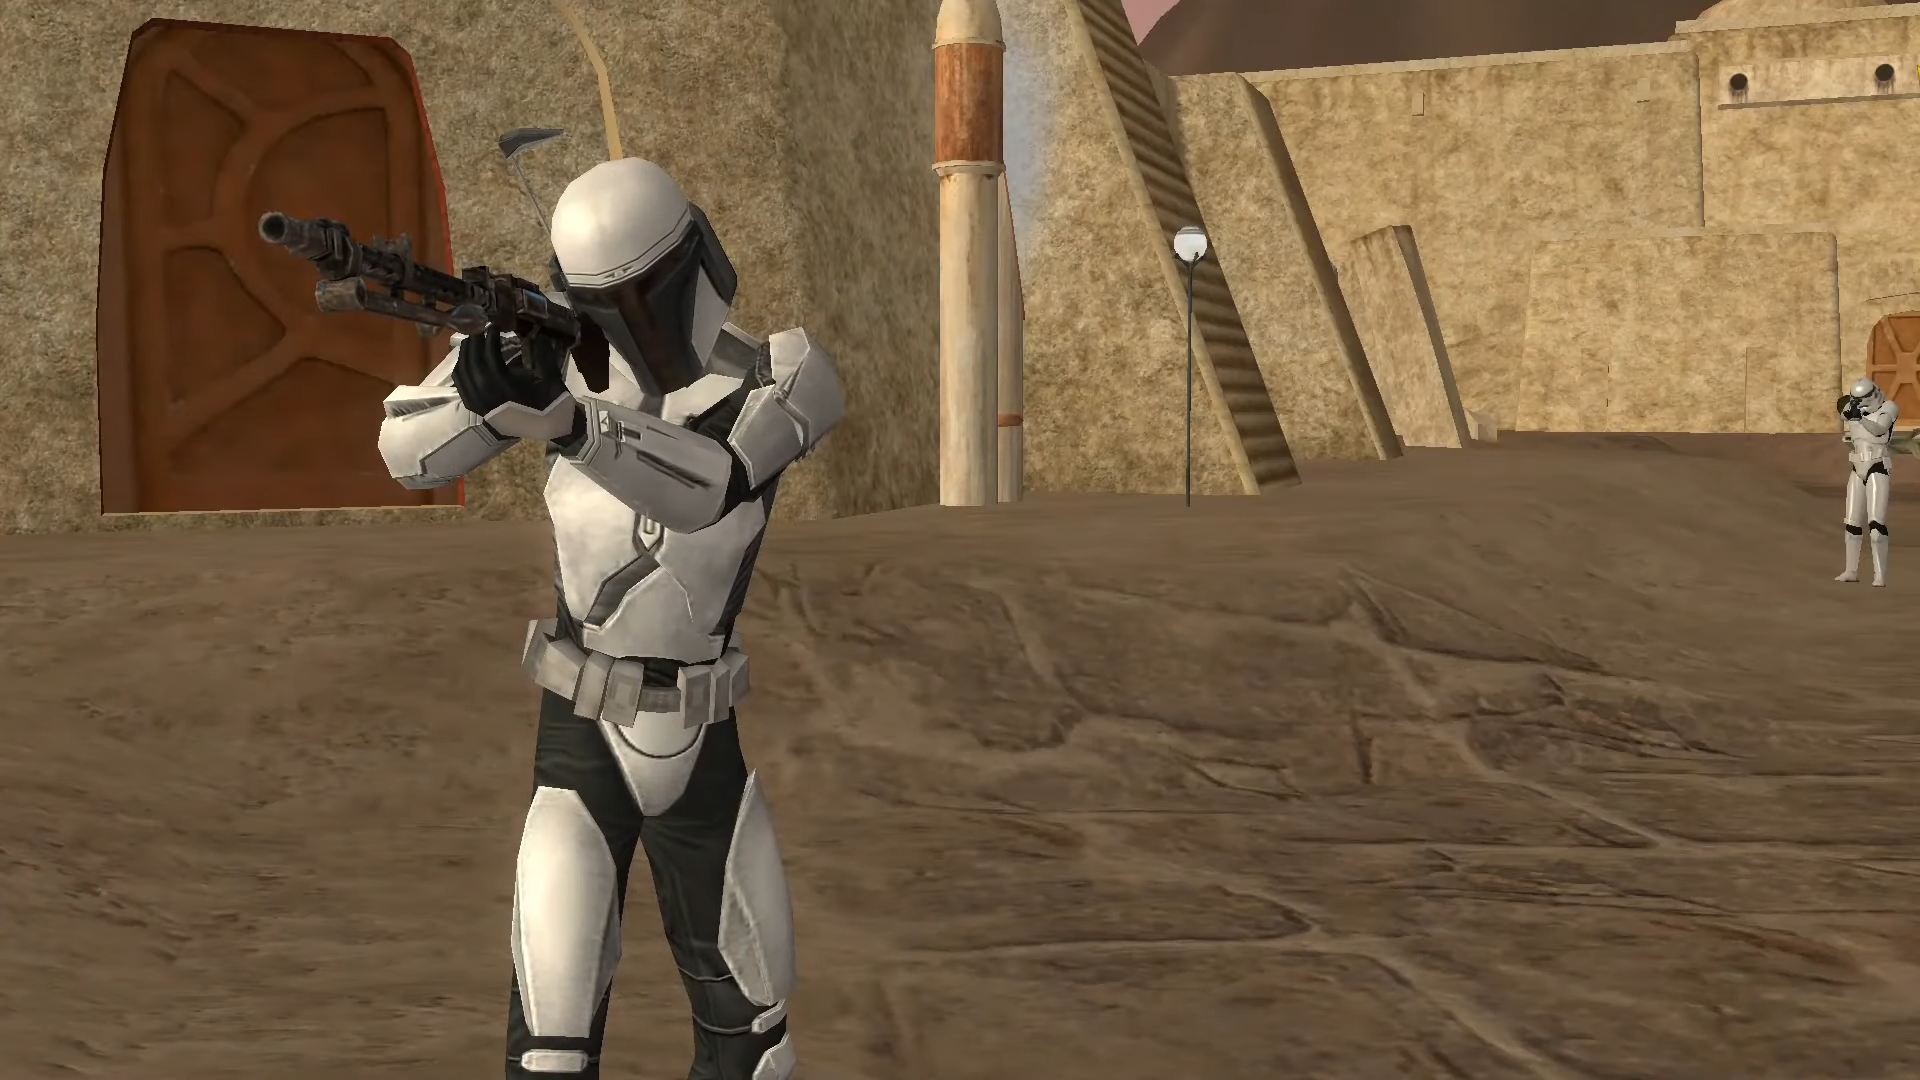  Star Wars Galaxies revival approaches 1.0 with a 'secretive Jedi unlock system' 